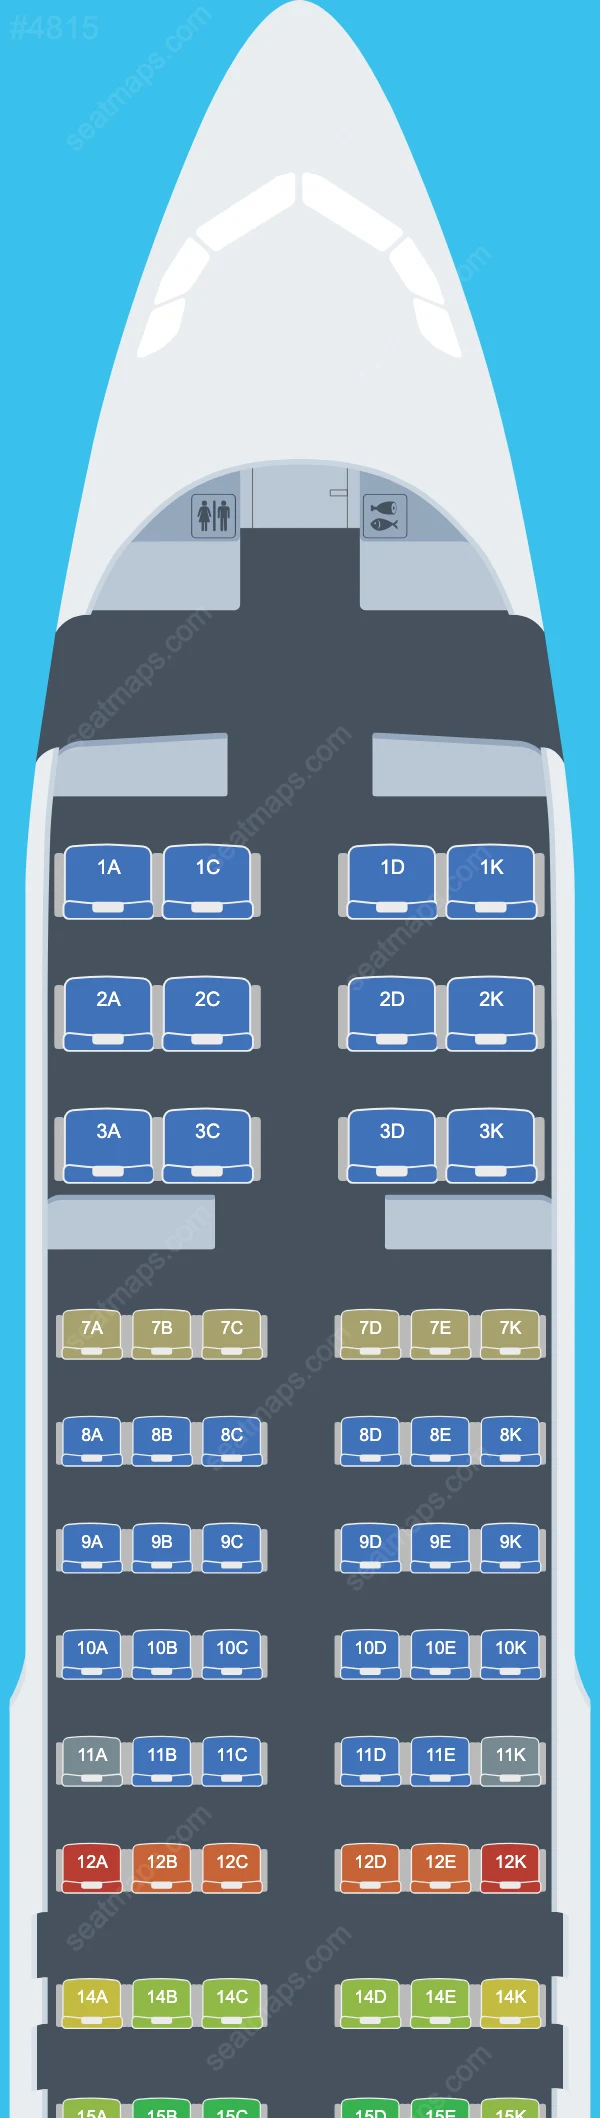 Avianca Airbus A320 Seat Maps A320-200